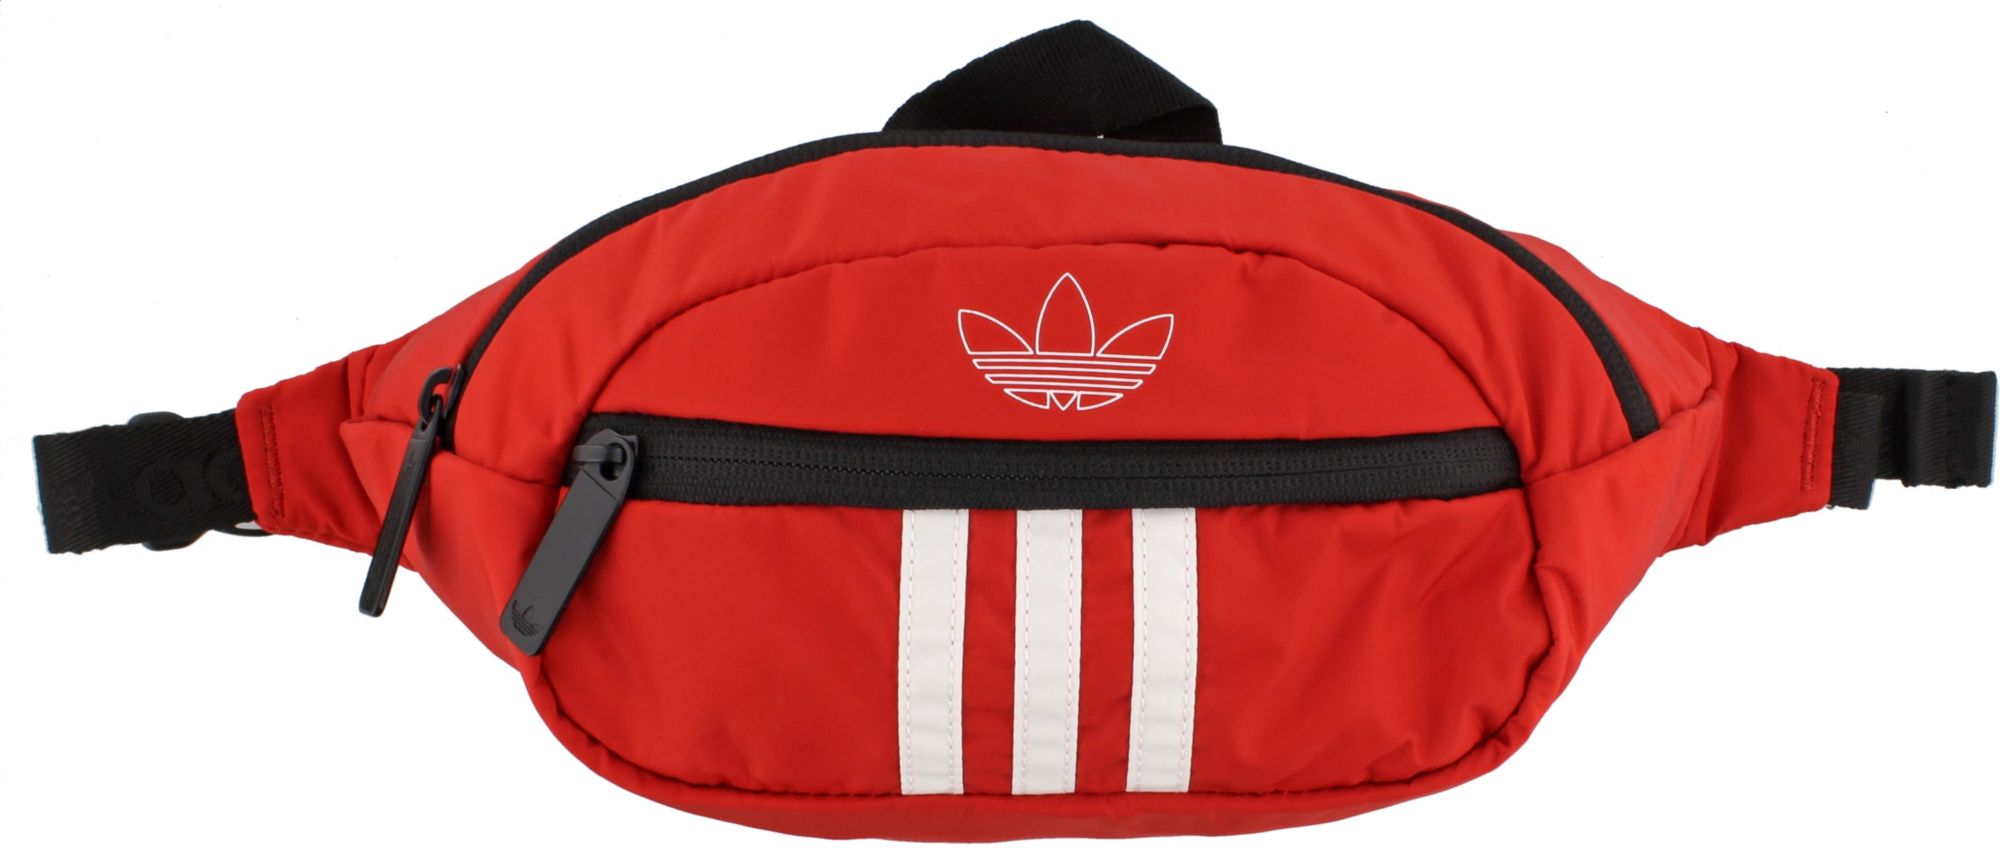 red fanny pack adidas